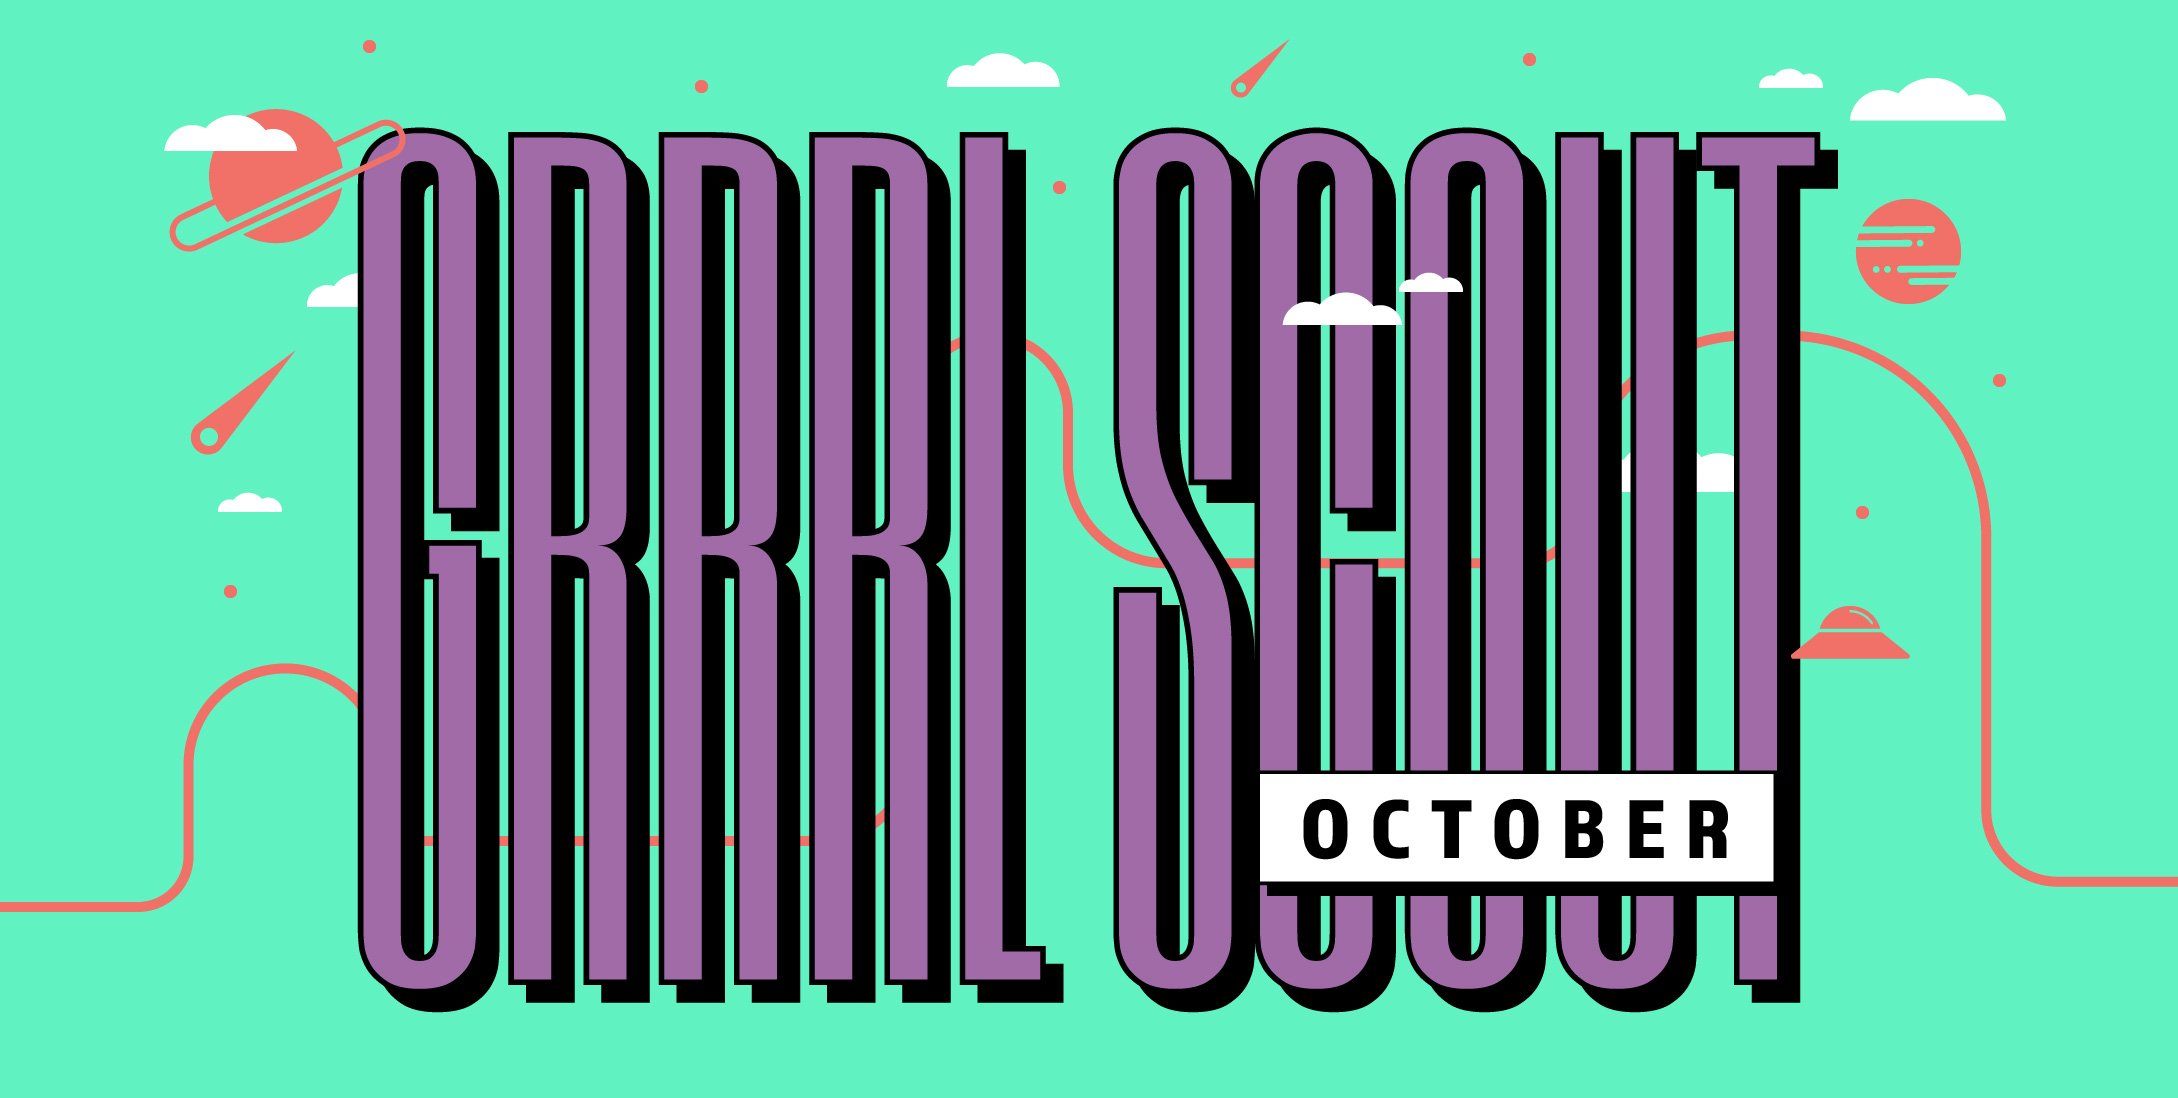 GRRRL SCOUT: Queer Dance PArty October 8, 2022 The Hook and Ladder Theater Doors 9:30pm - 1am :: 21+ General Admission*: $10 Early / $14 Advance / $20 Day of Show *Note: Additional fees may apply ENTRANCE: Glassdoor on the Northside ally of the building.